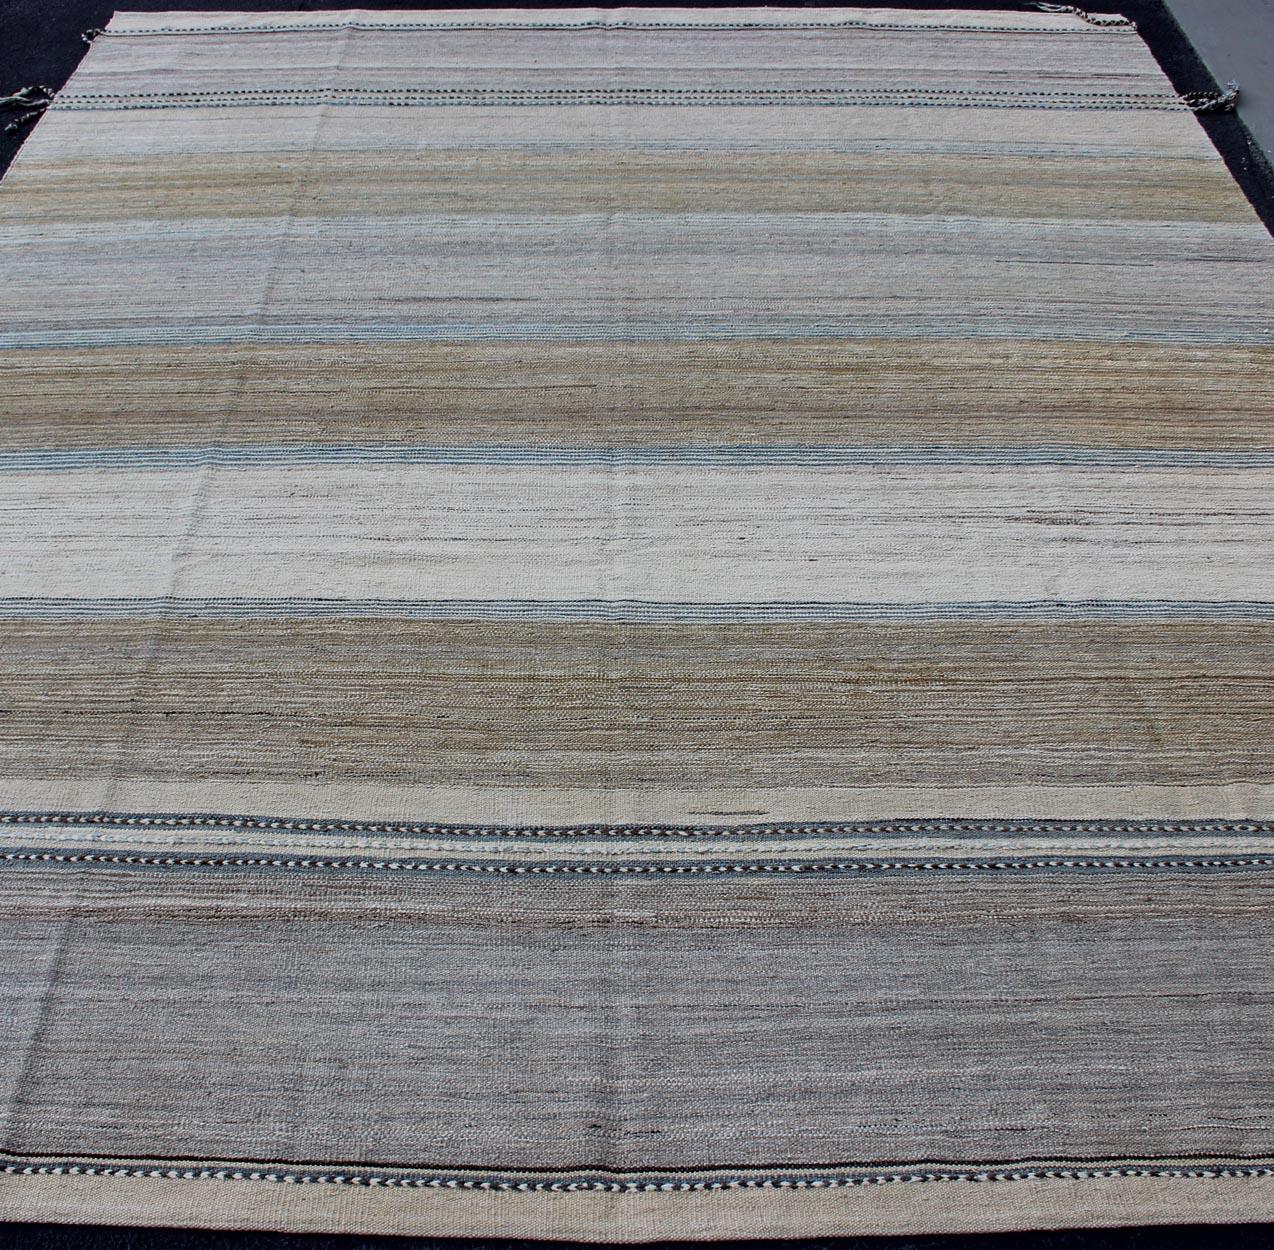 Afghan Modern Kilim Rug With Large Stripes in Shades of Blue, Taupe, Light Brown, Gray  For Sale